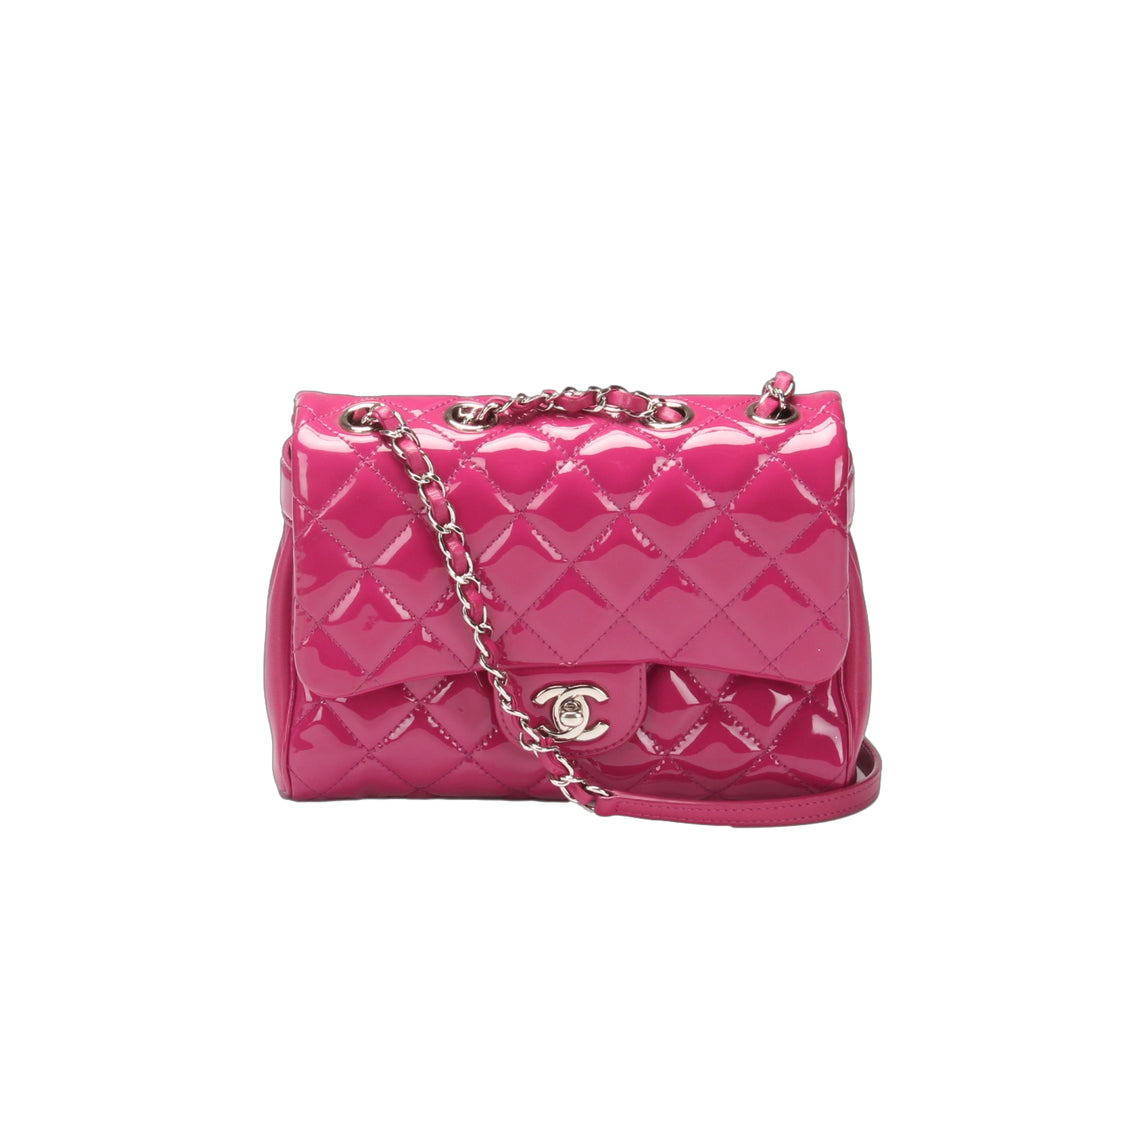 Patent Leather CC Timeless Flap Bag